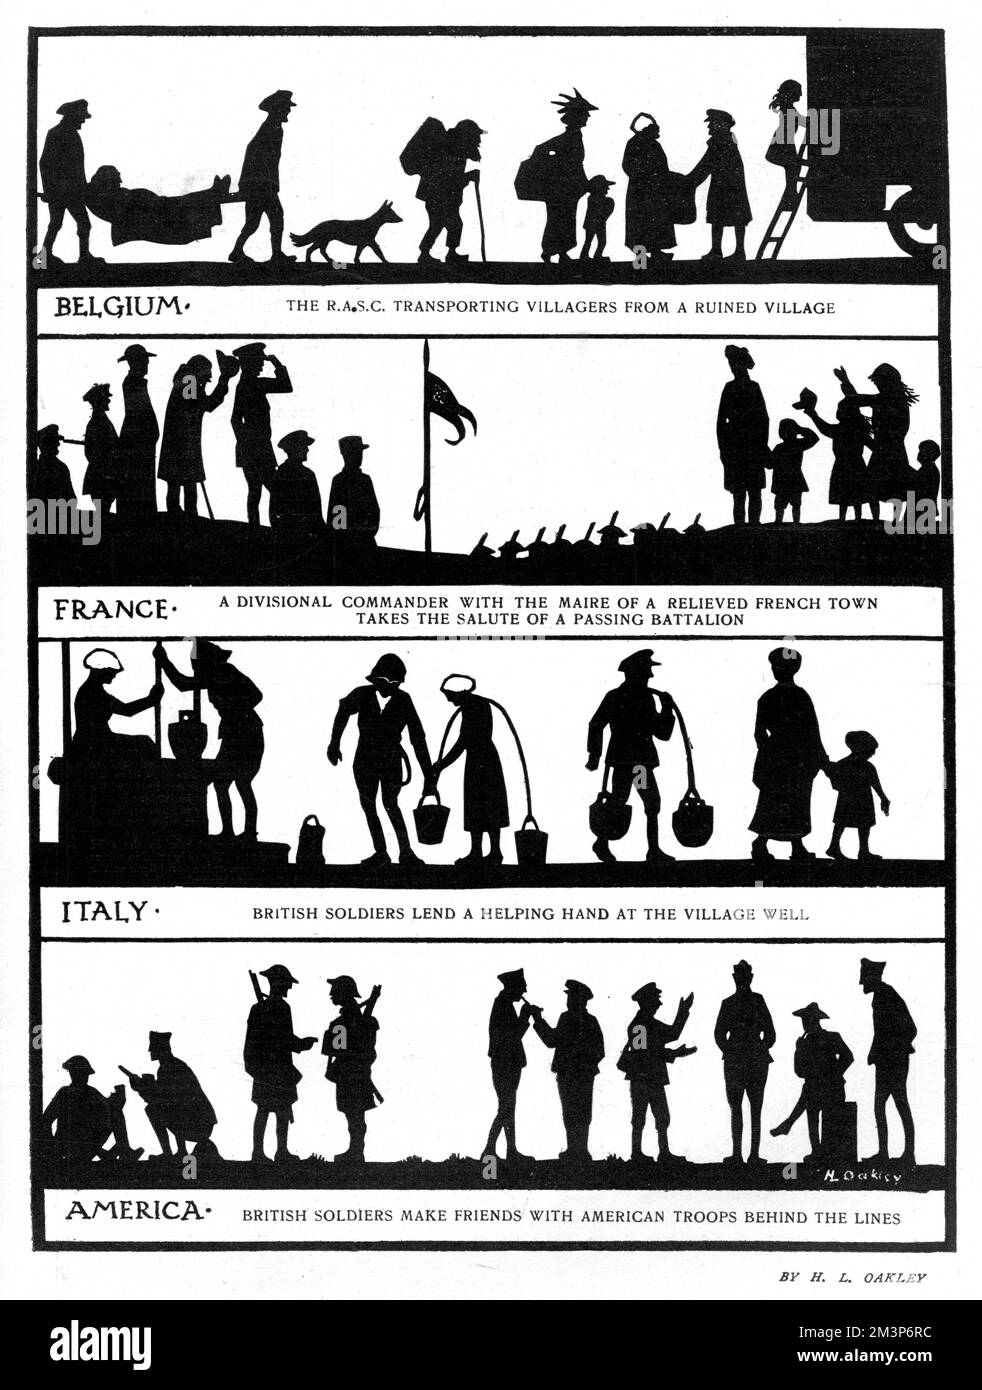 Scenes in silhouette showing how British soldiers helped their Allies during World War One.  In Belgium, the R.A.S.C transported villagers from a ruined village.  In France, a divisional commander with the mayor of a relieved French town takes the salute of a passing battalion.  In Italy, British soldiers help out the local ladies at a well and with America, the British make friends with American soldiers behind the lines.      Date: 1919 Stock Photo